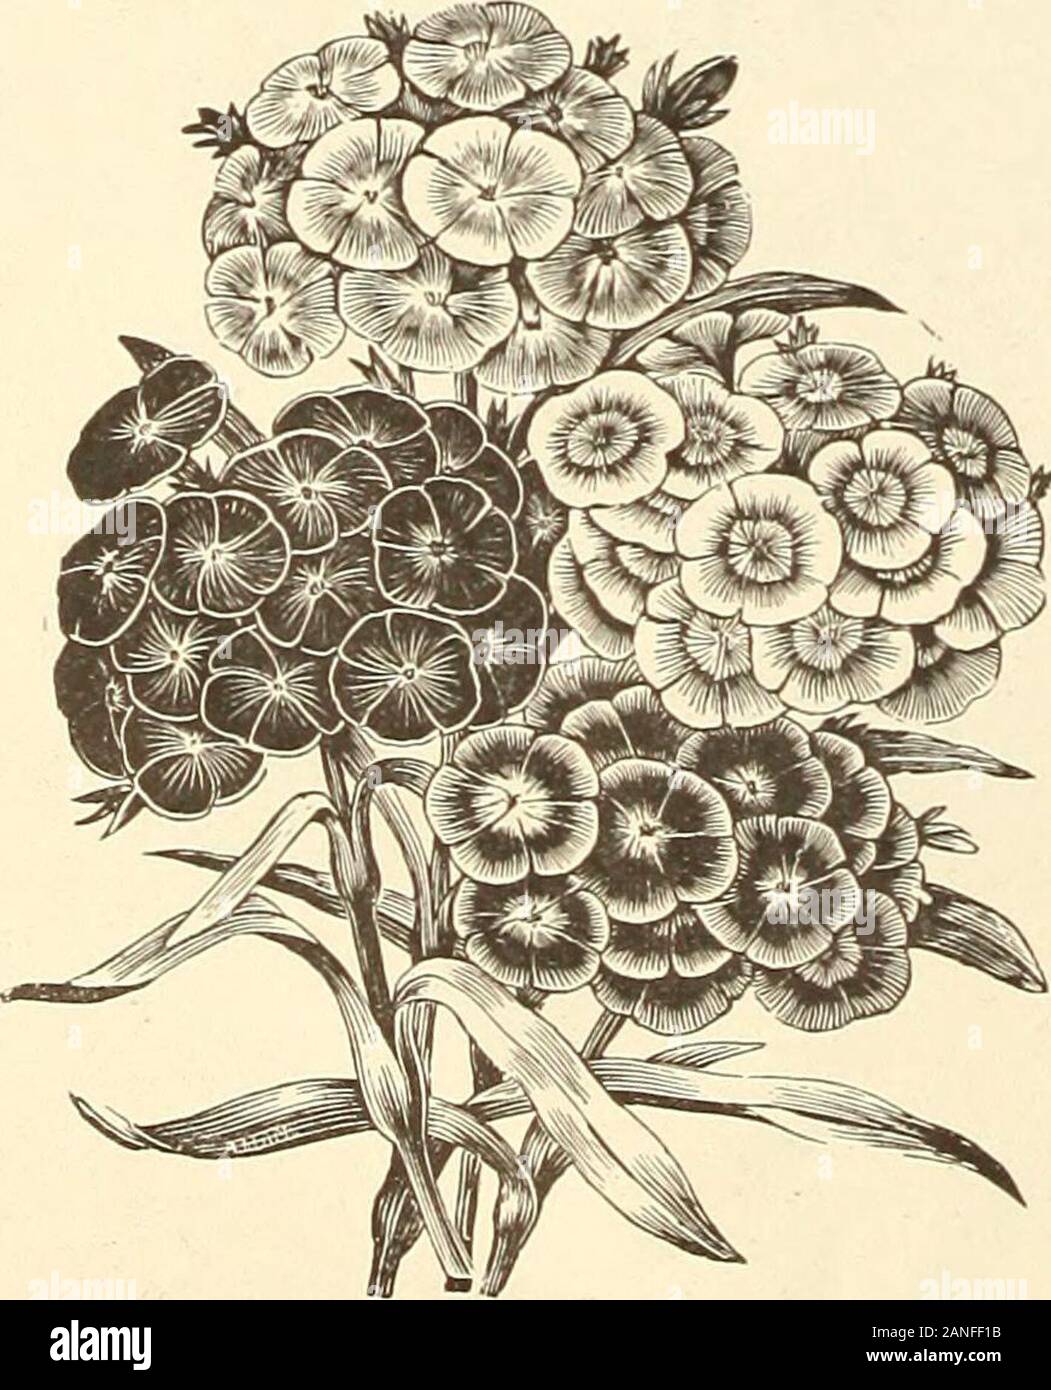 Farquhar's 1910 garden annual . Scabiosa Caucasica. 7855 VERBASCUM Olympieum. Mullein. Largo wliiti rki. silvery foliage, with grand spikes of yellow floweni. 5 ft., i oz., .30; .1078(i0 Panosum. Stately plant with large woolly leaves and dense spikes of sulphur yellow flowers. 6 feet, Oz., .40; .05 VERONICA. Speedwell.Elegant hardy peremiials of easy culture and thriving inany good soil. 7865 Amethystina. Light blue. 2 feet 15 7870 Longifolia. I^ong spikes of rich bhu&gt; flowers. 2 feet, .107875 Ineana. Lovely shade of iolet. U feet 10. SWEET WILLIAM. Dionthus Barbatm.Showy hardy l)iennials Stock Photo